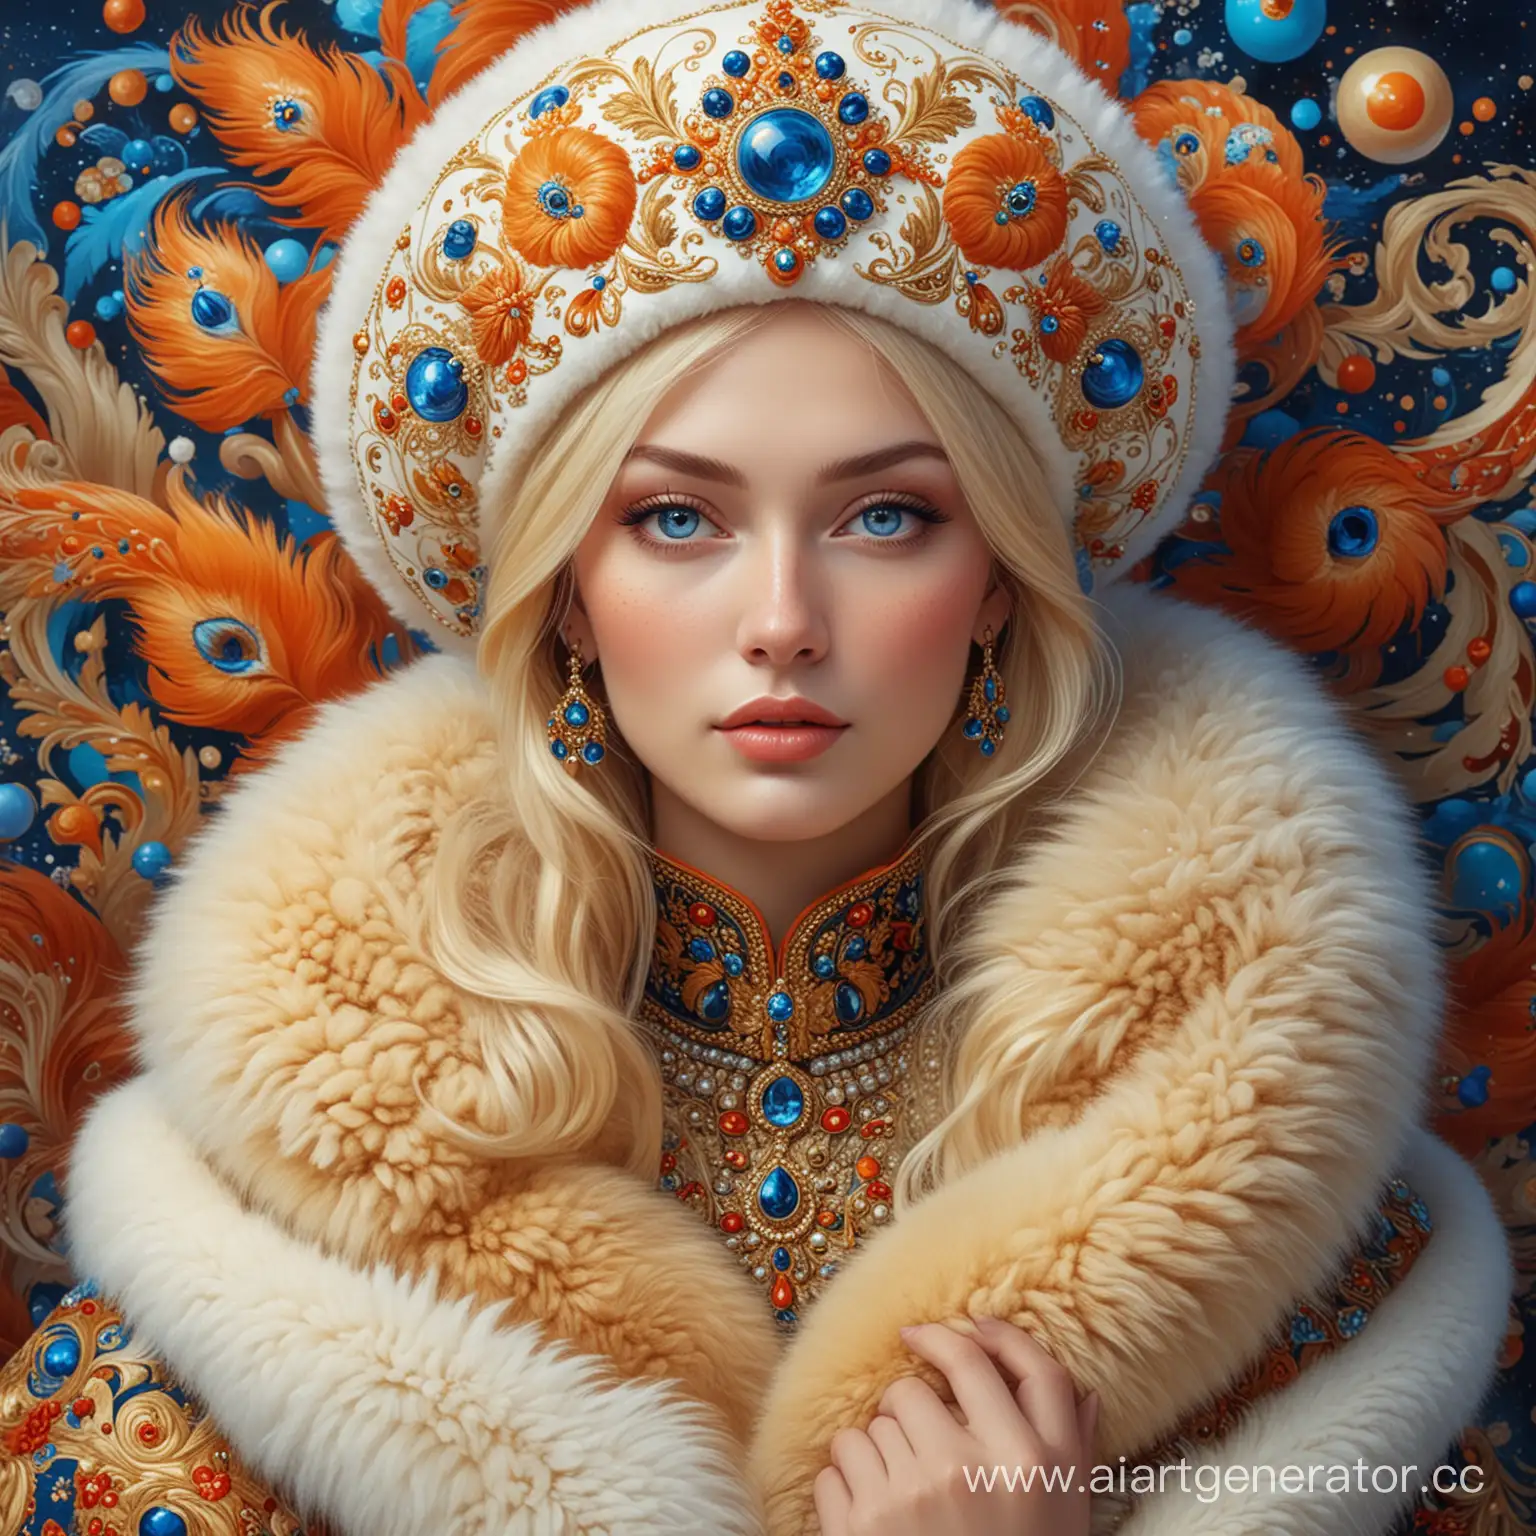 Russian style,patterns,painting,khokhloma.luxurious, full-length Russian girl goddess expressive blue eyes long eyelashes blonde hair ,fur coat hat made of fox fur,digital art,,Kustodiev,colorful swirls of paint,hyper-surreal,many floating spheres,beautiful illustration,space mufflers,5D illustration,colors with ,Delicate detail,Cinematic